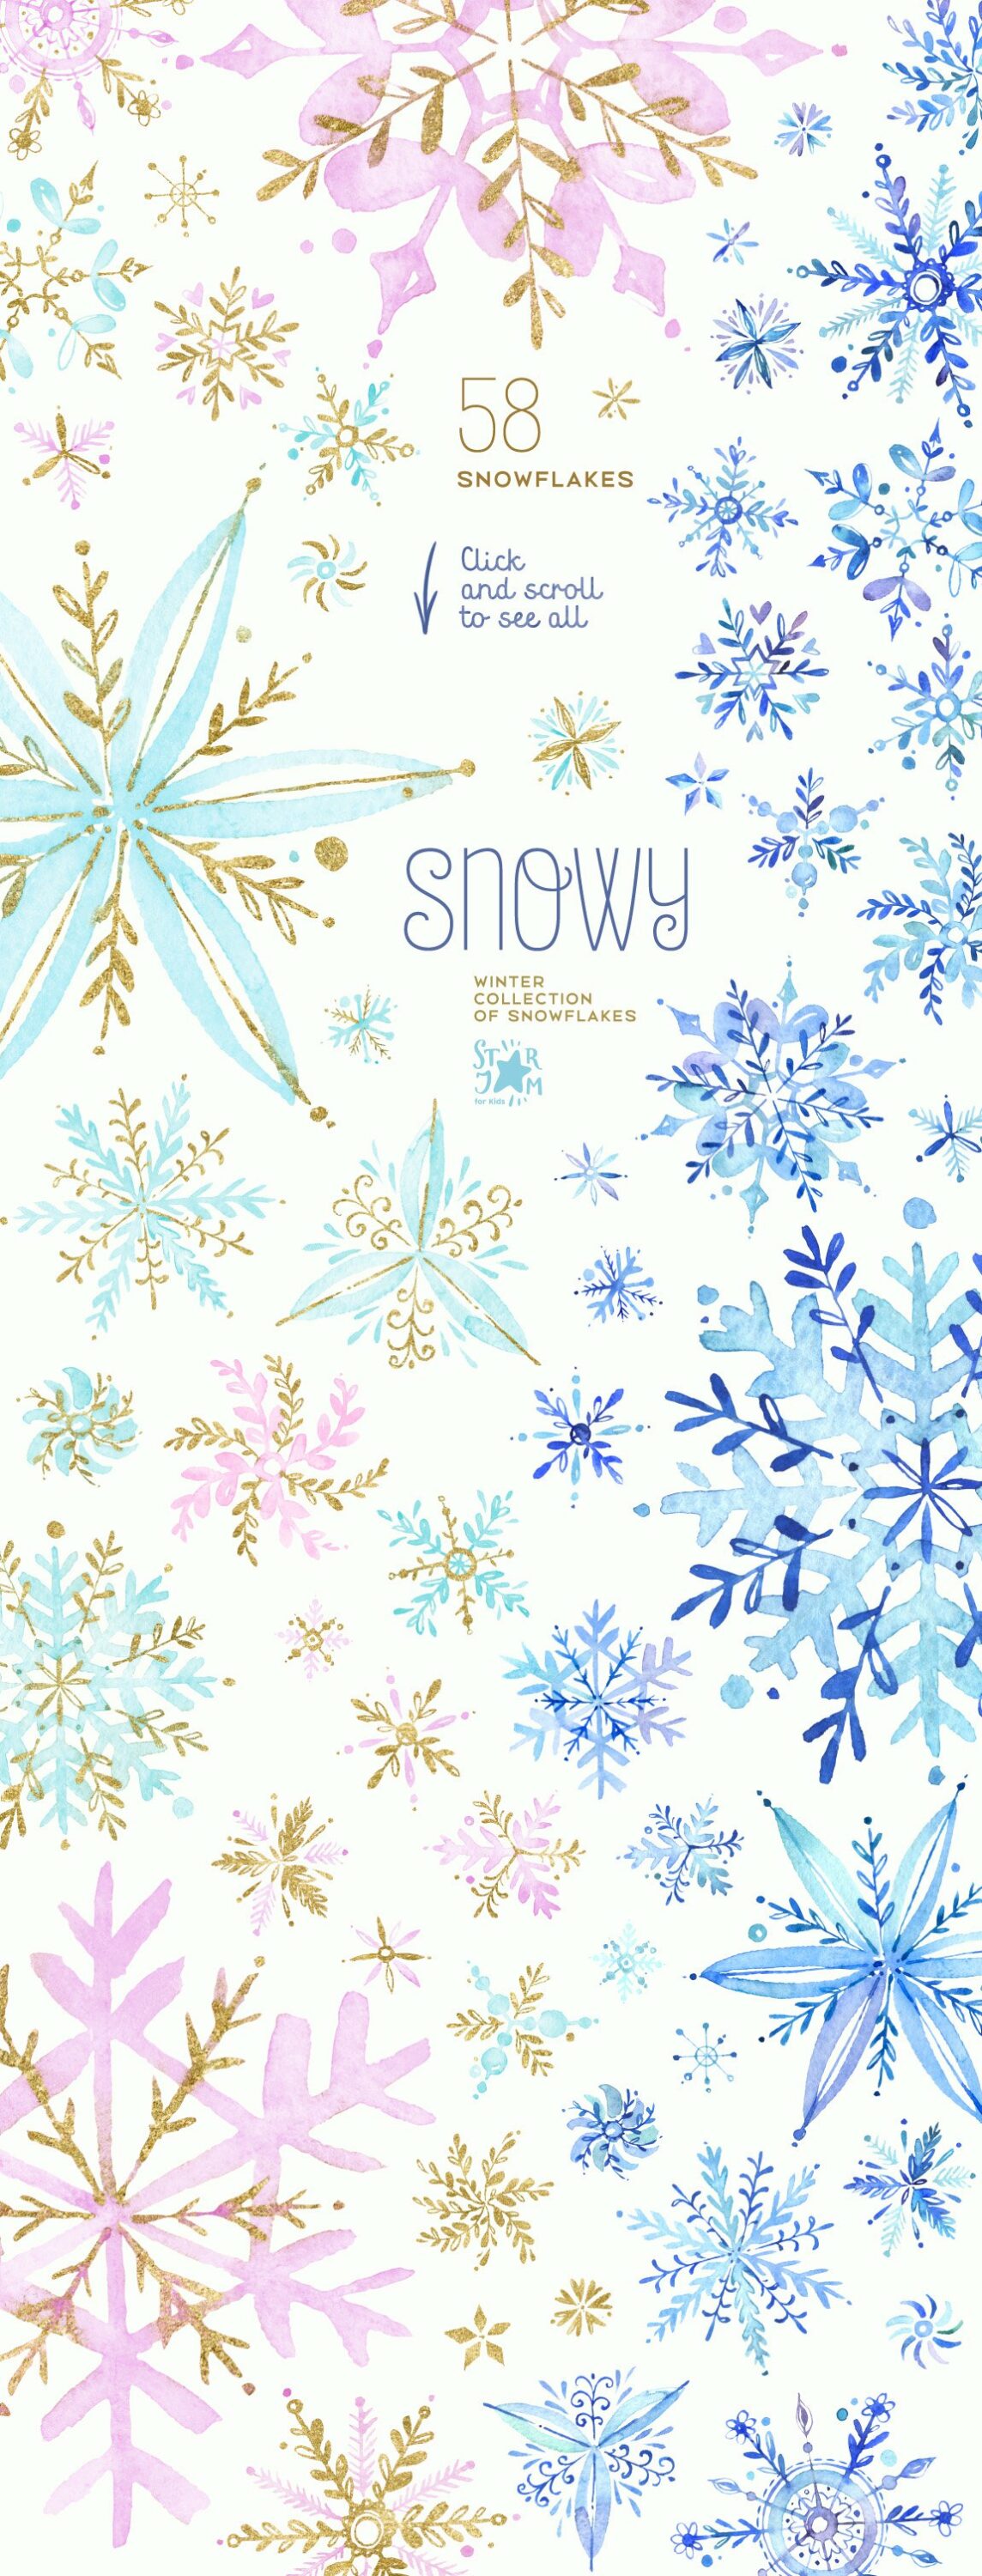 A set of 58 different snowflakes in light blue, blue, golden and pink and light blue lettering "Snowy".